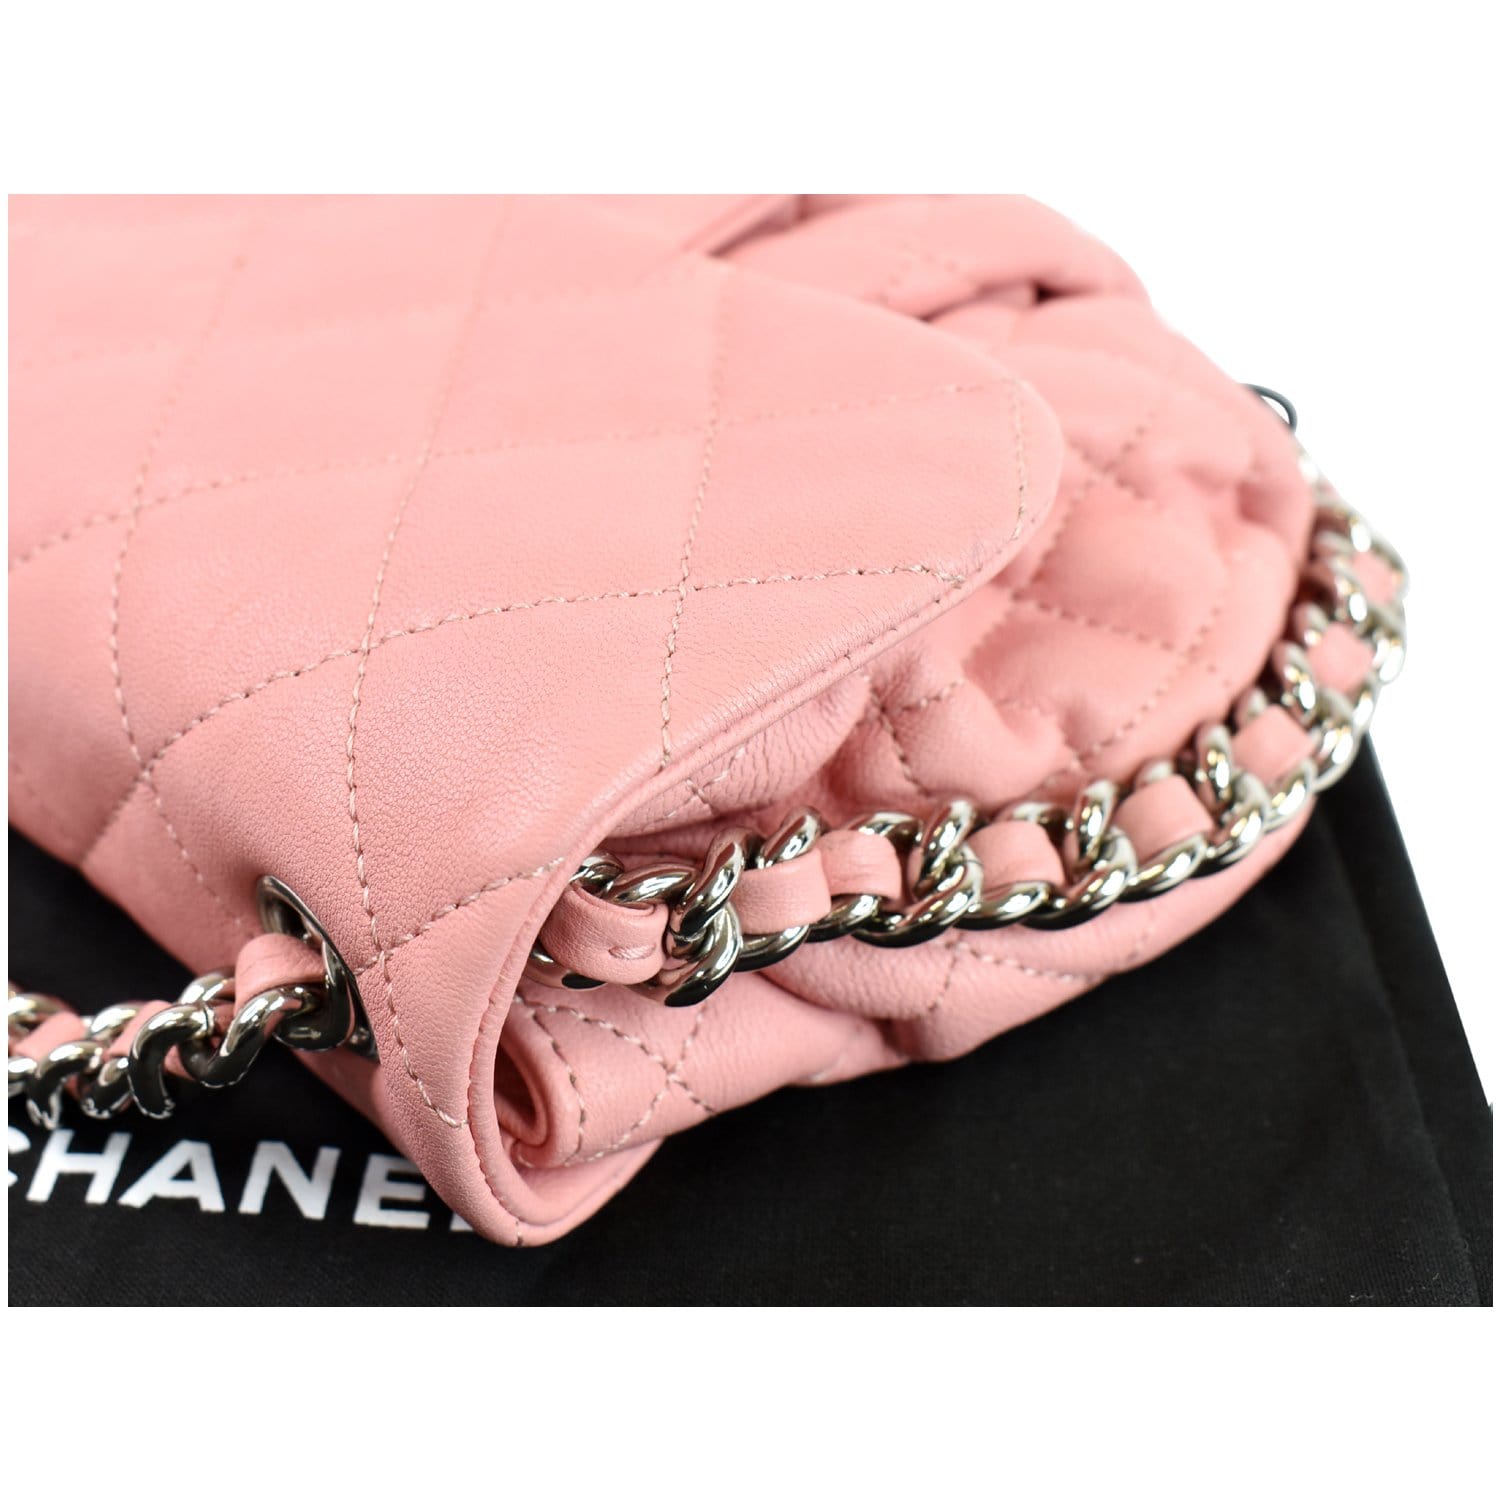 Chanel Chain Around Bag Reference Guide - Spotted Fashion